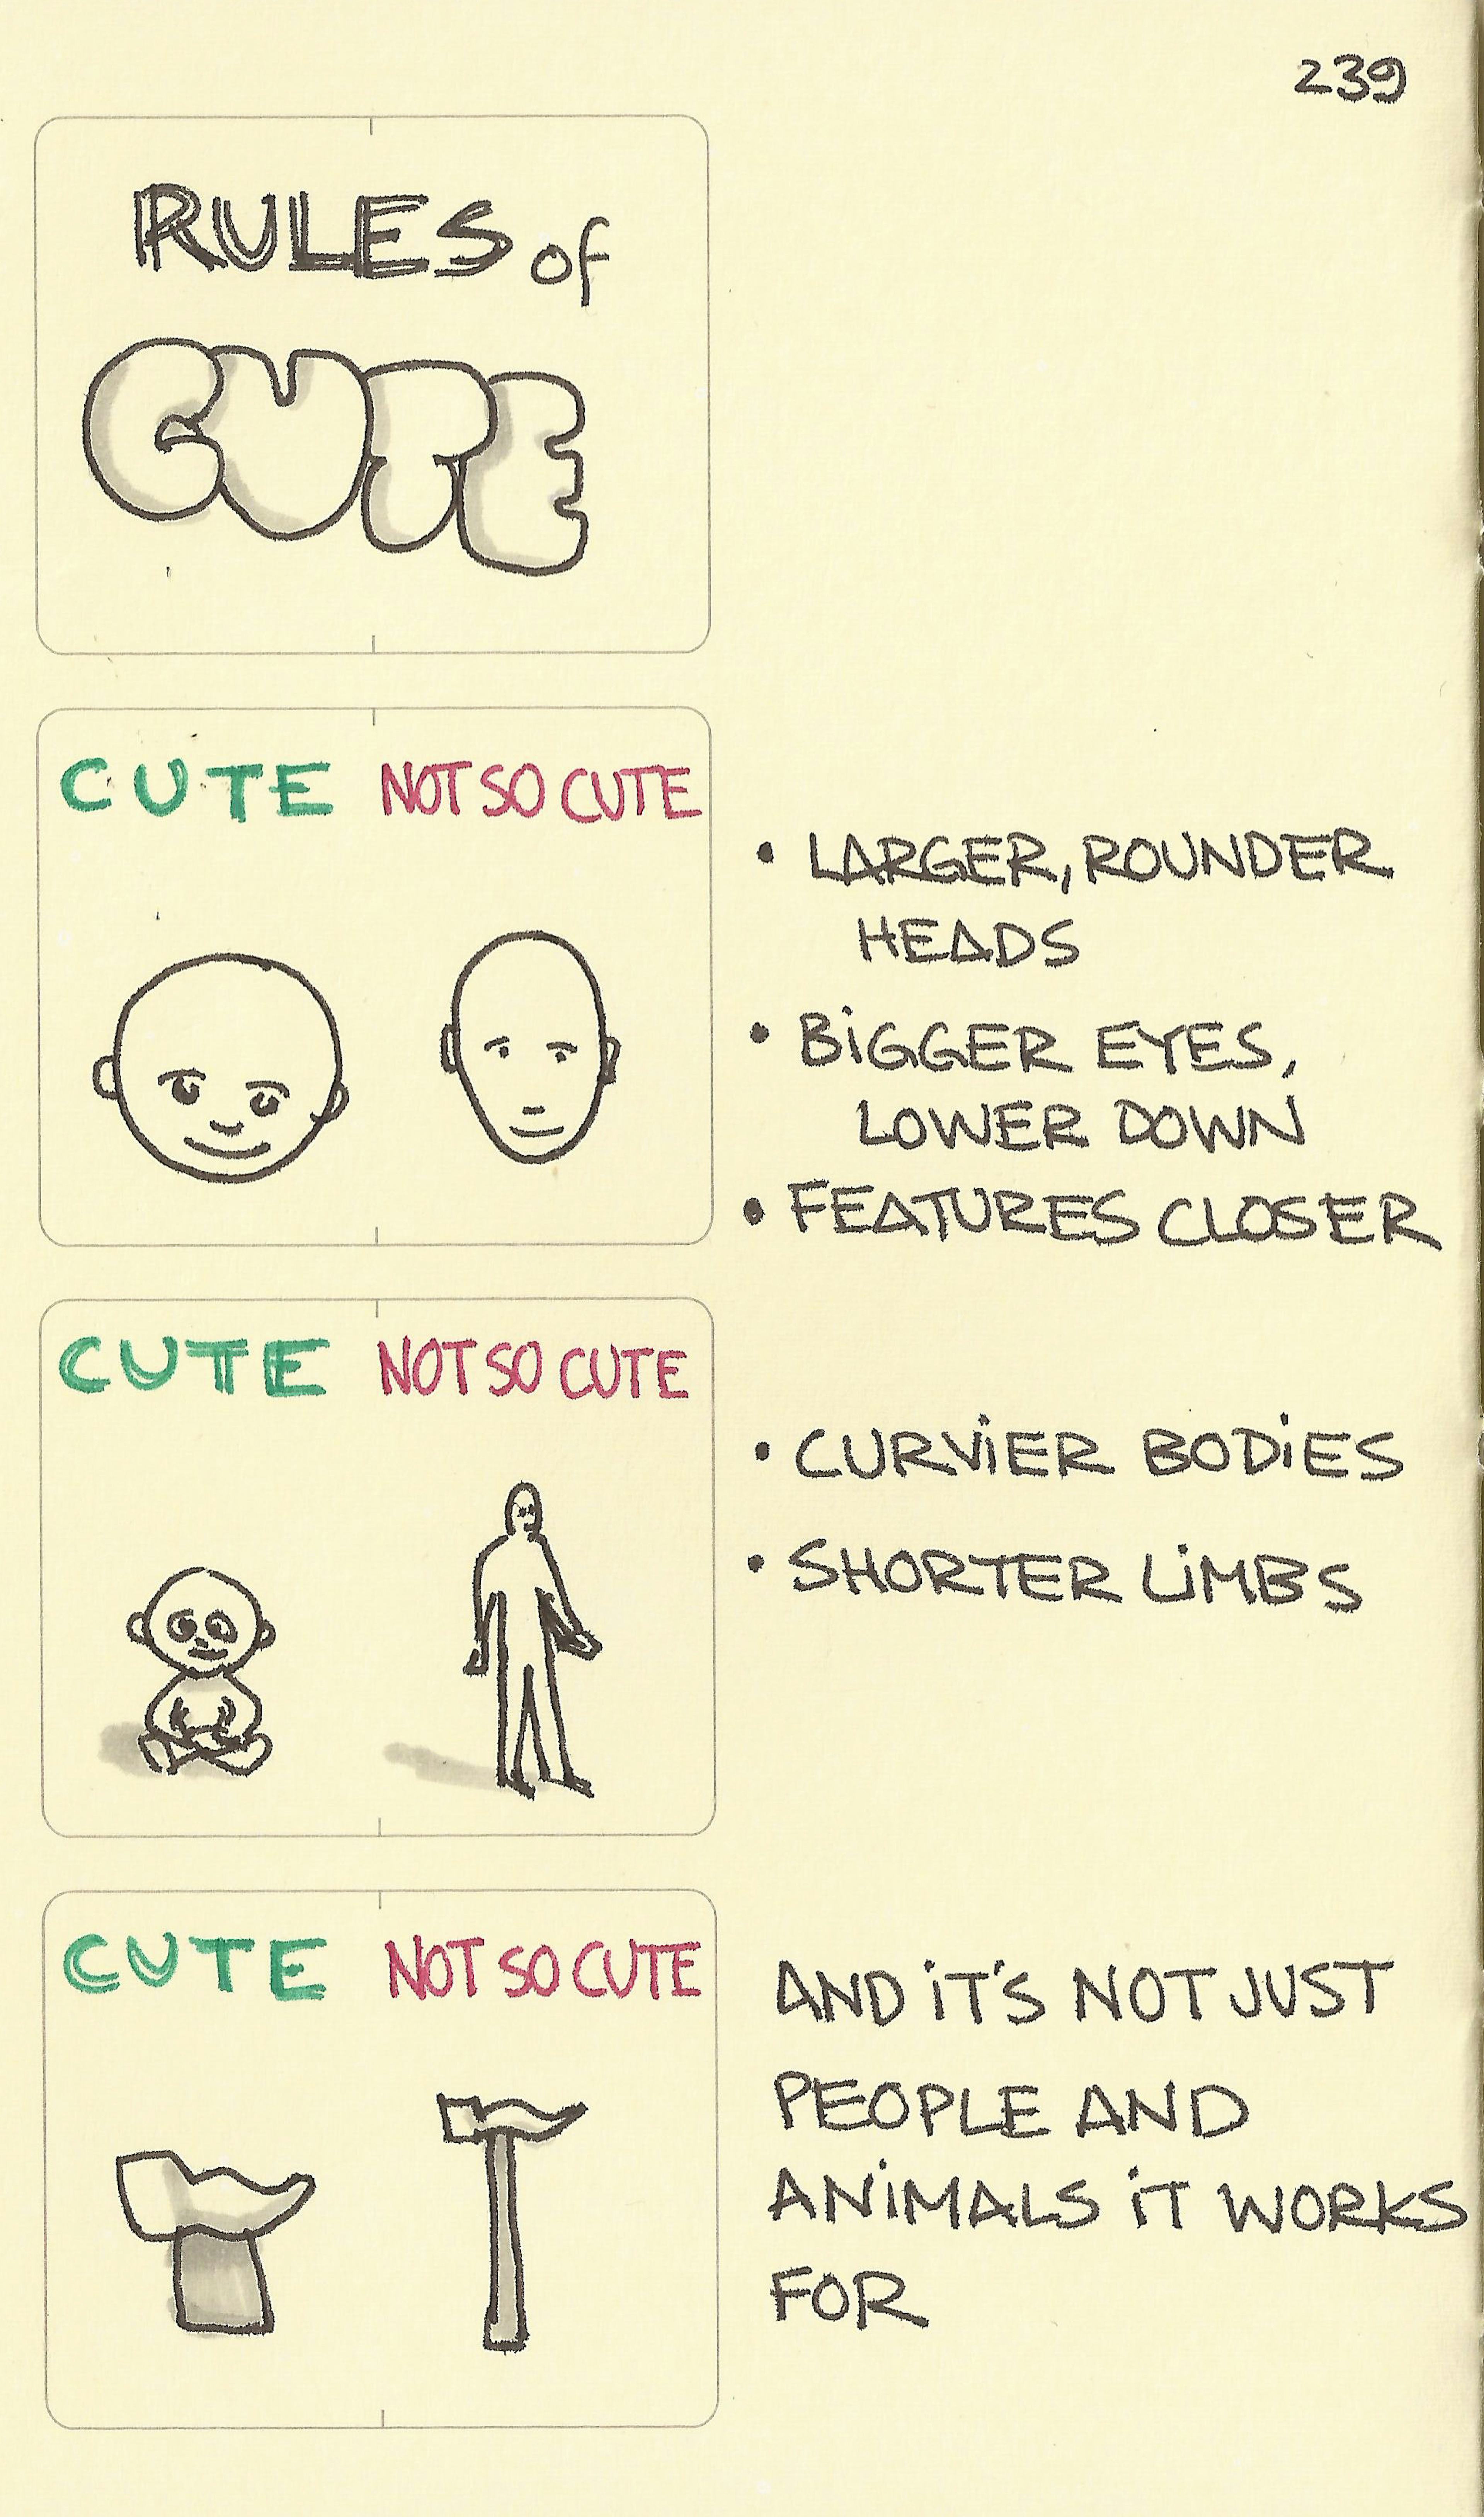 Rules of cute - Sketchplanations